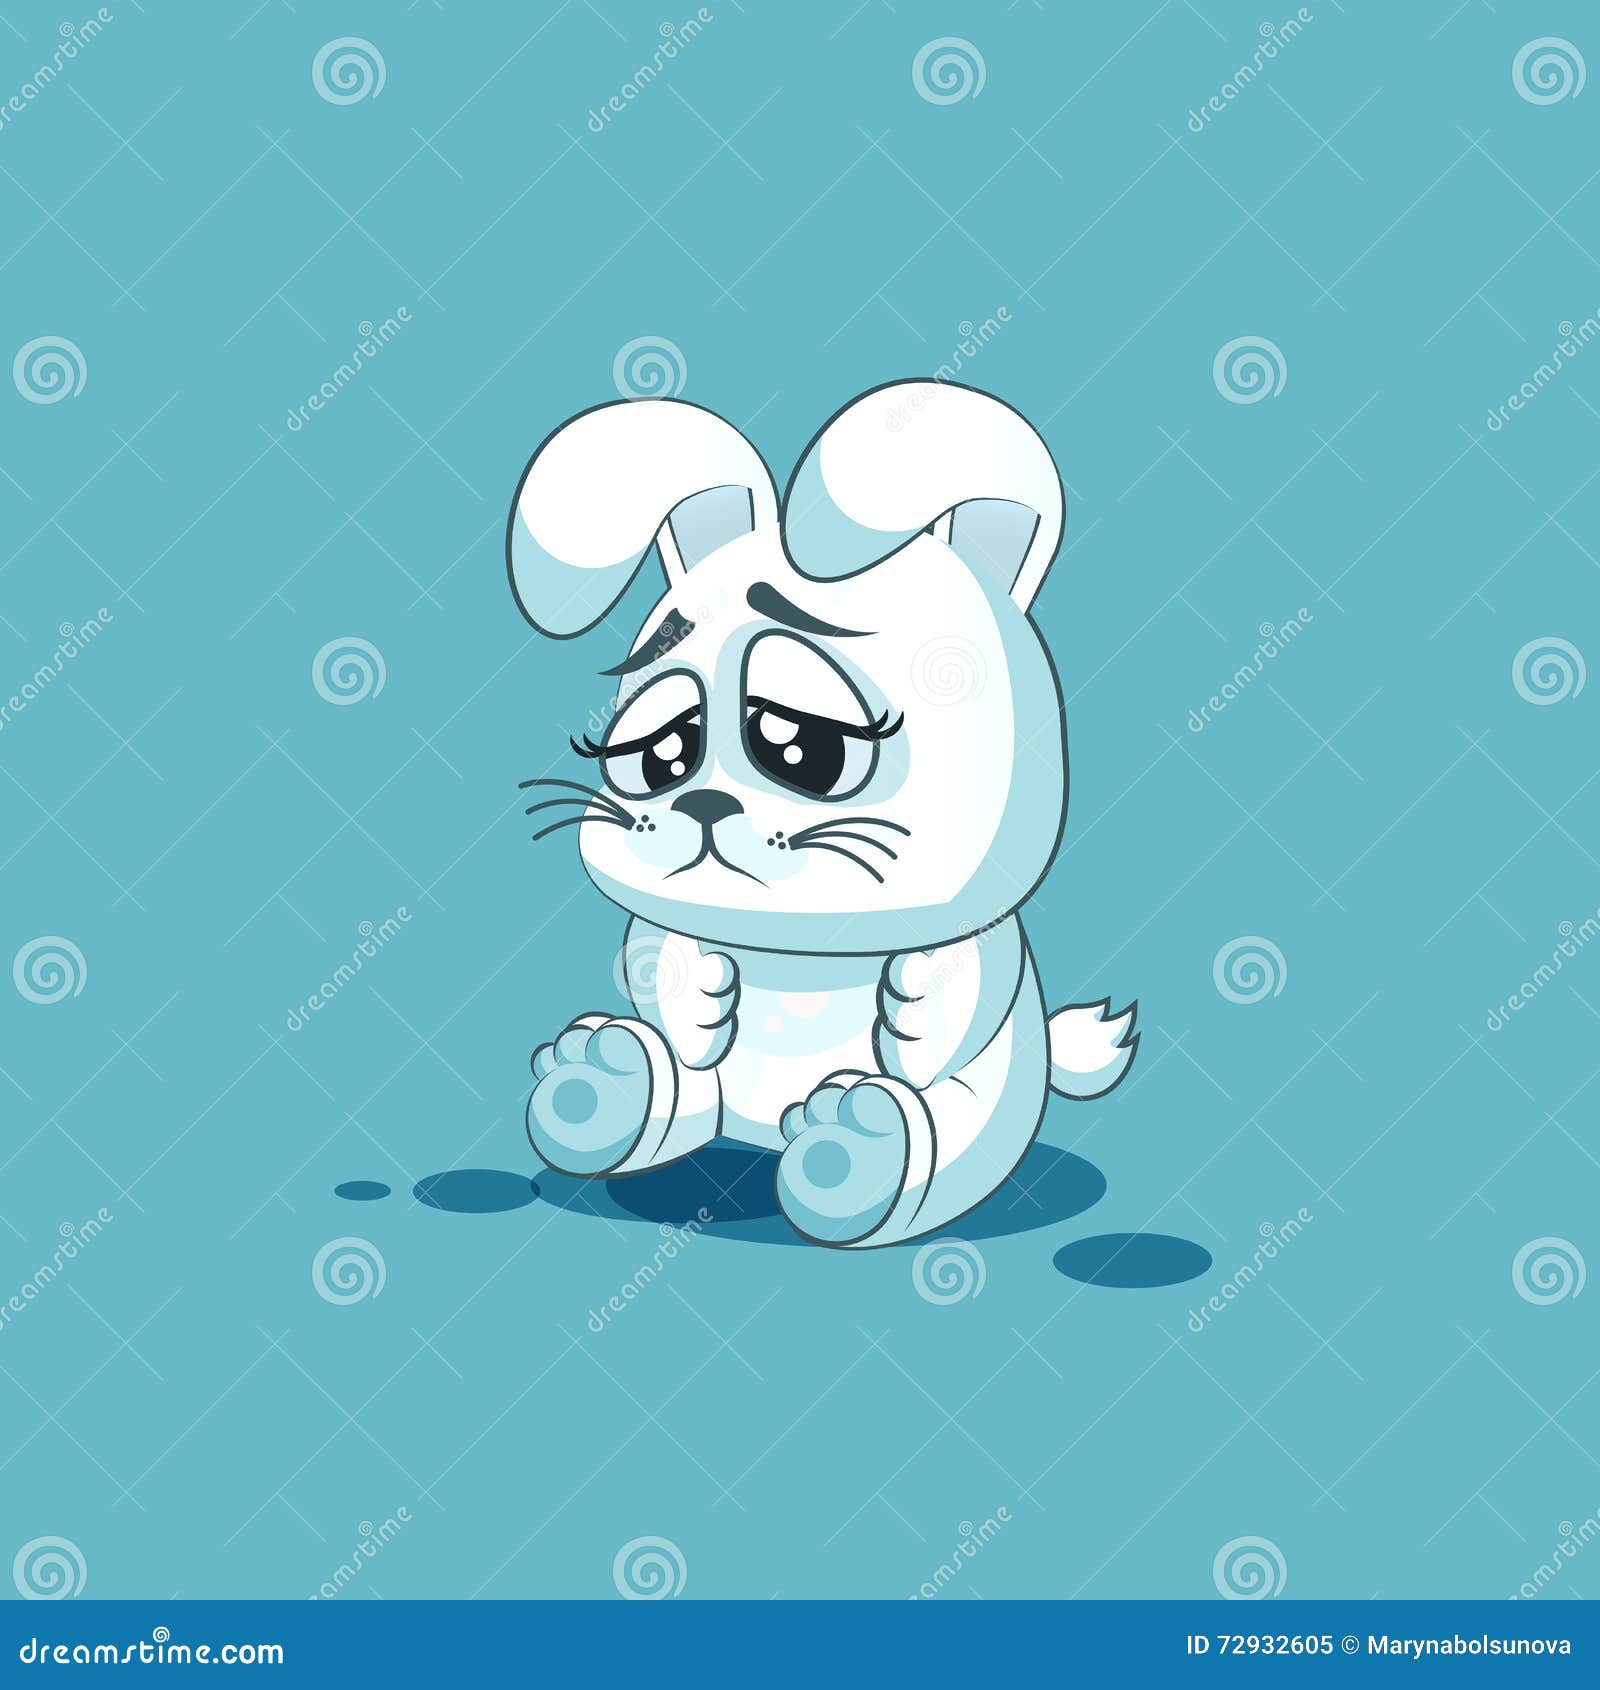 Emoji Character Cartoon White Leveret Sad and Frustrated Sticker Emoticon  Stock Vector - Illustration of hare, personage: 72932605